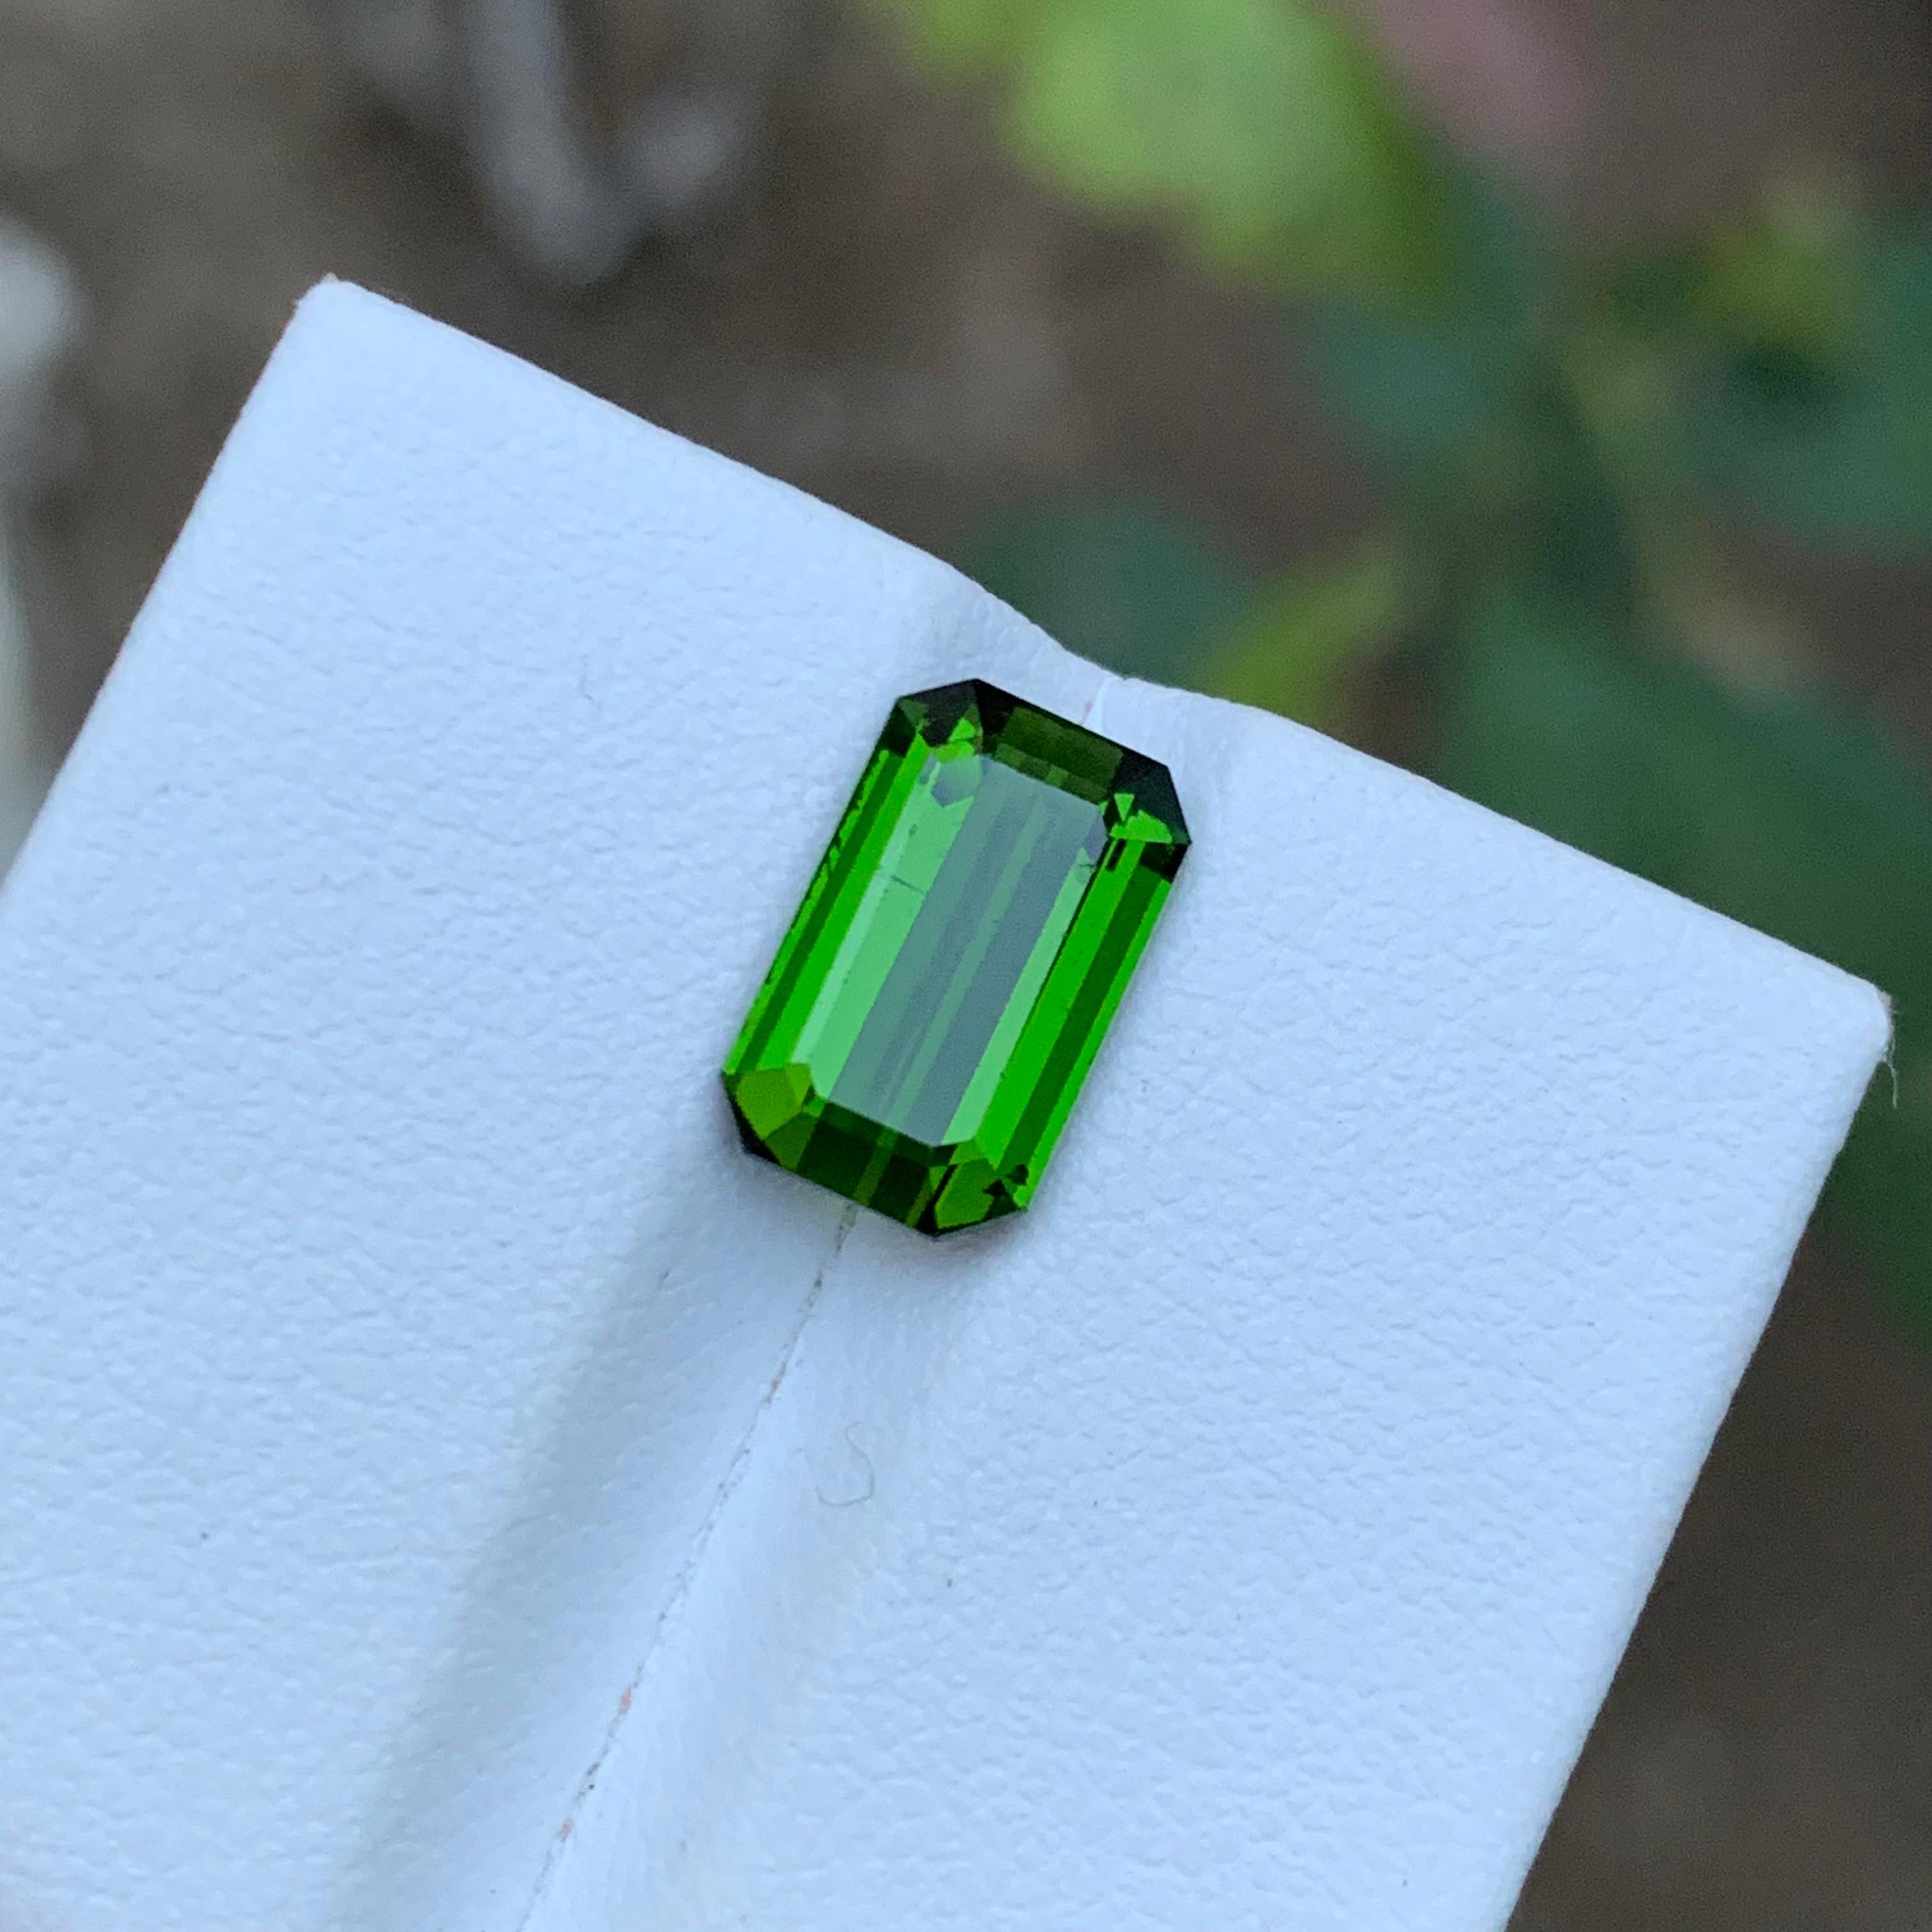 Rare Vivid Green Tourmaline Gemstone, 3.35 Ct Emerald Cut for Ring/Necklace For Sale 5